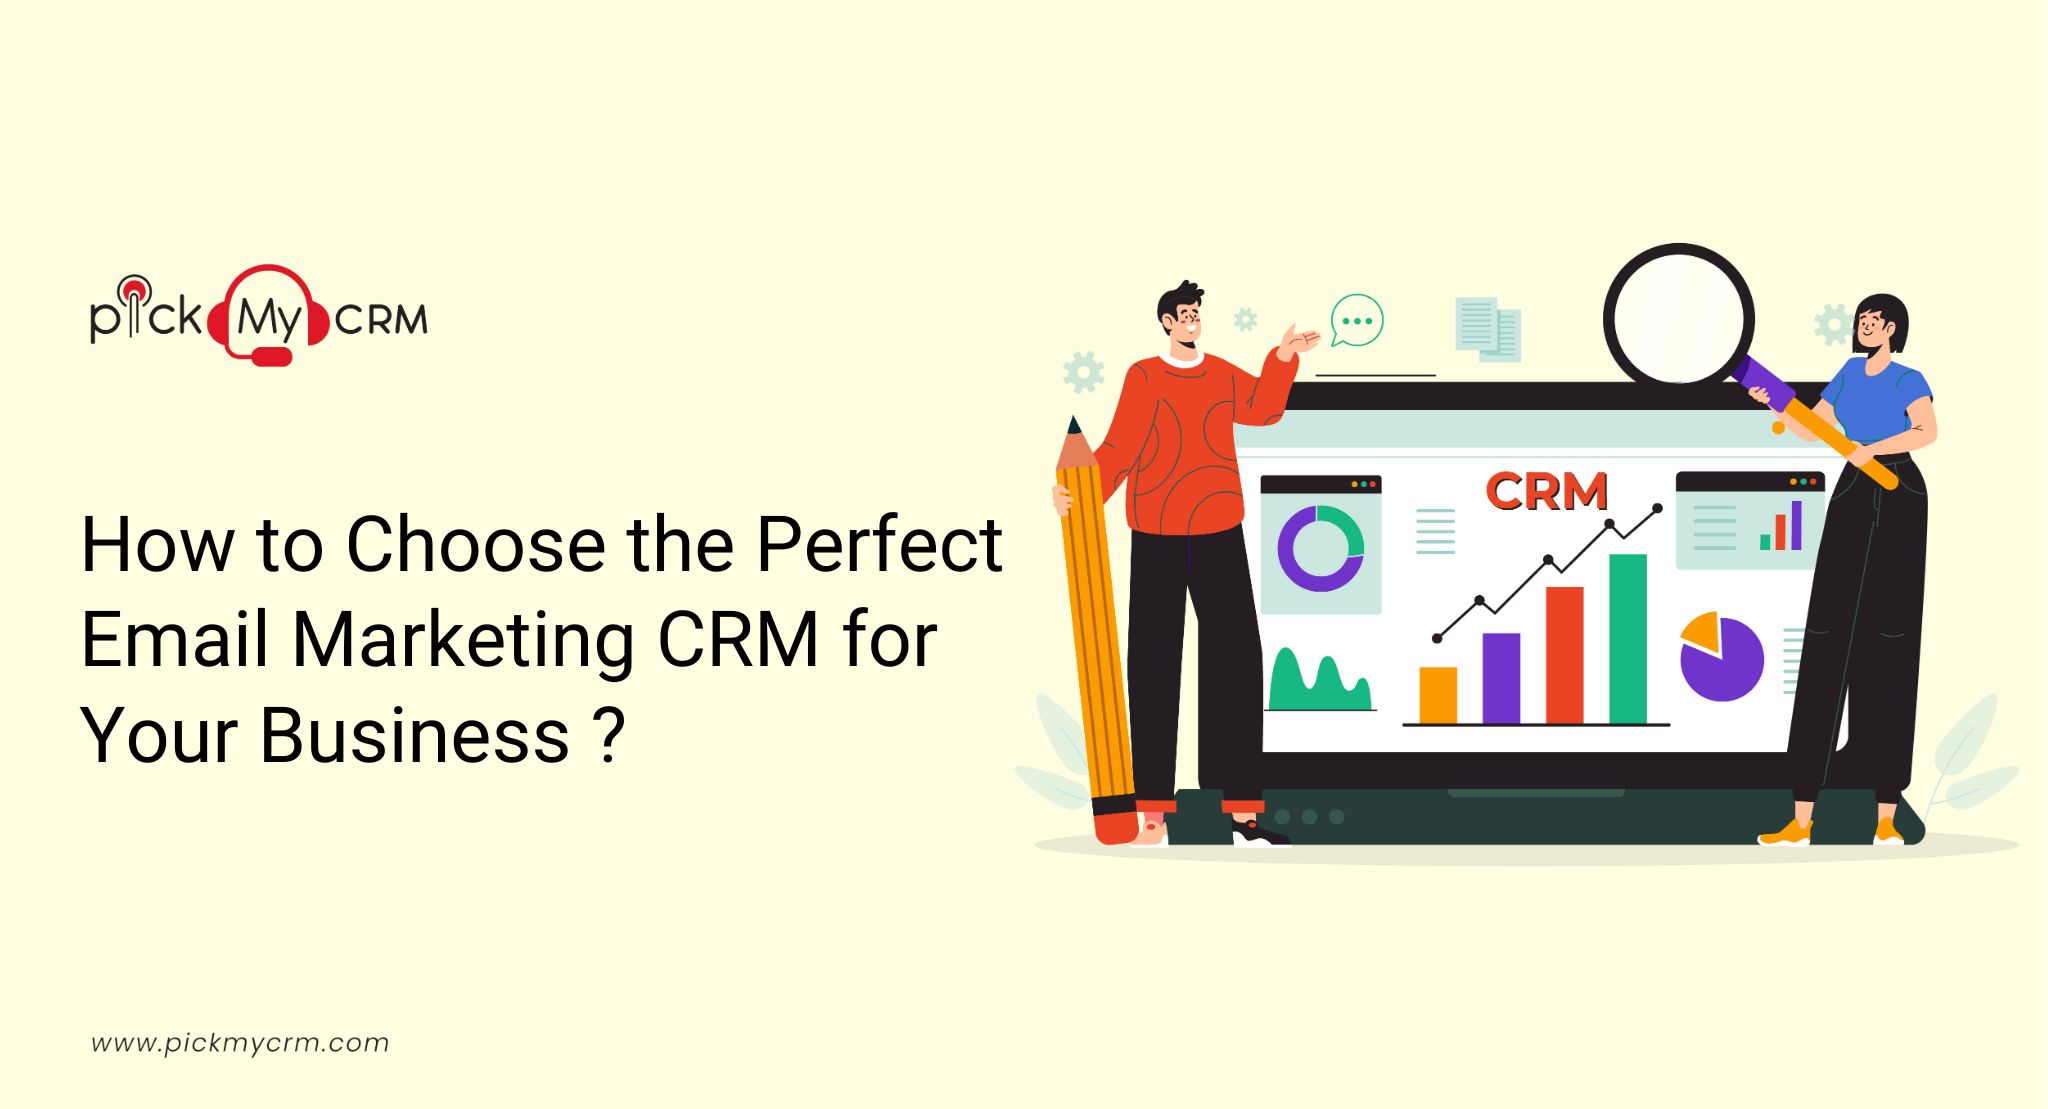 How to Choose the Perfect Email Marketing CRM for Your Business?